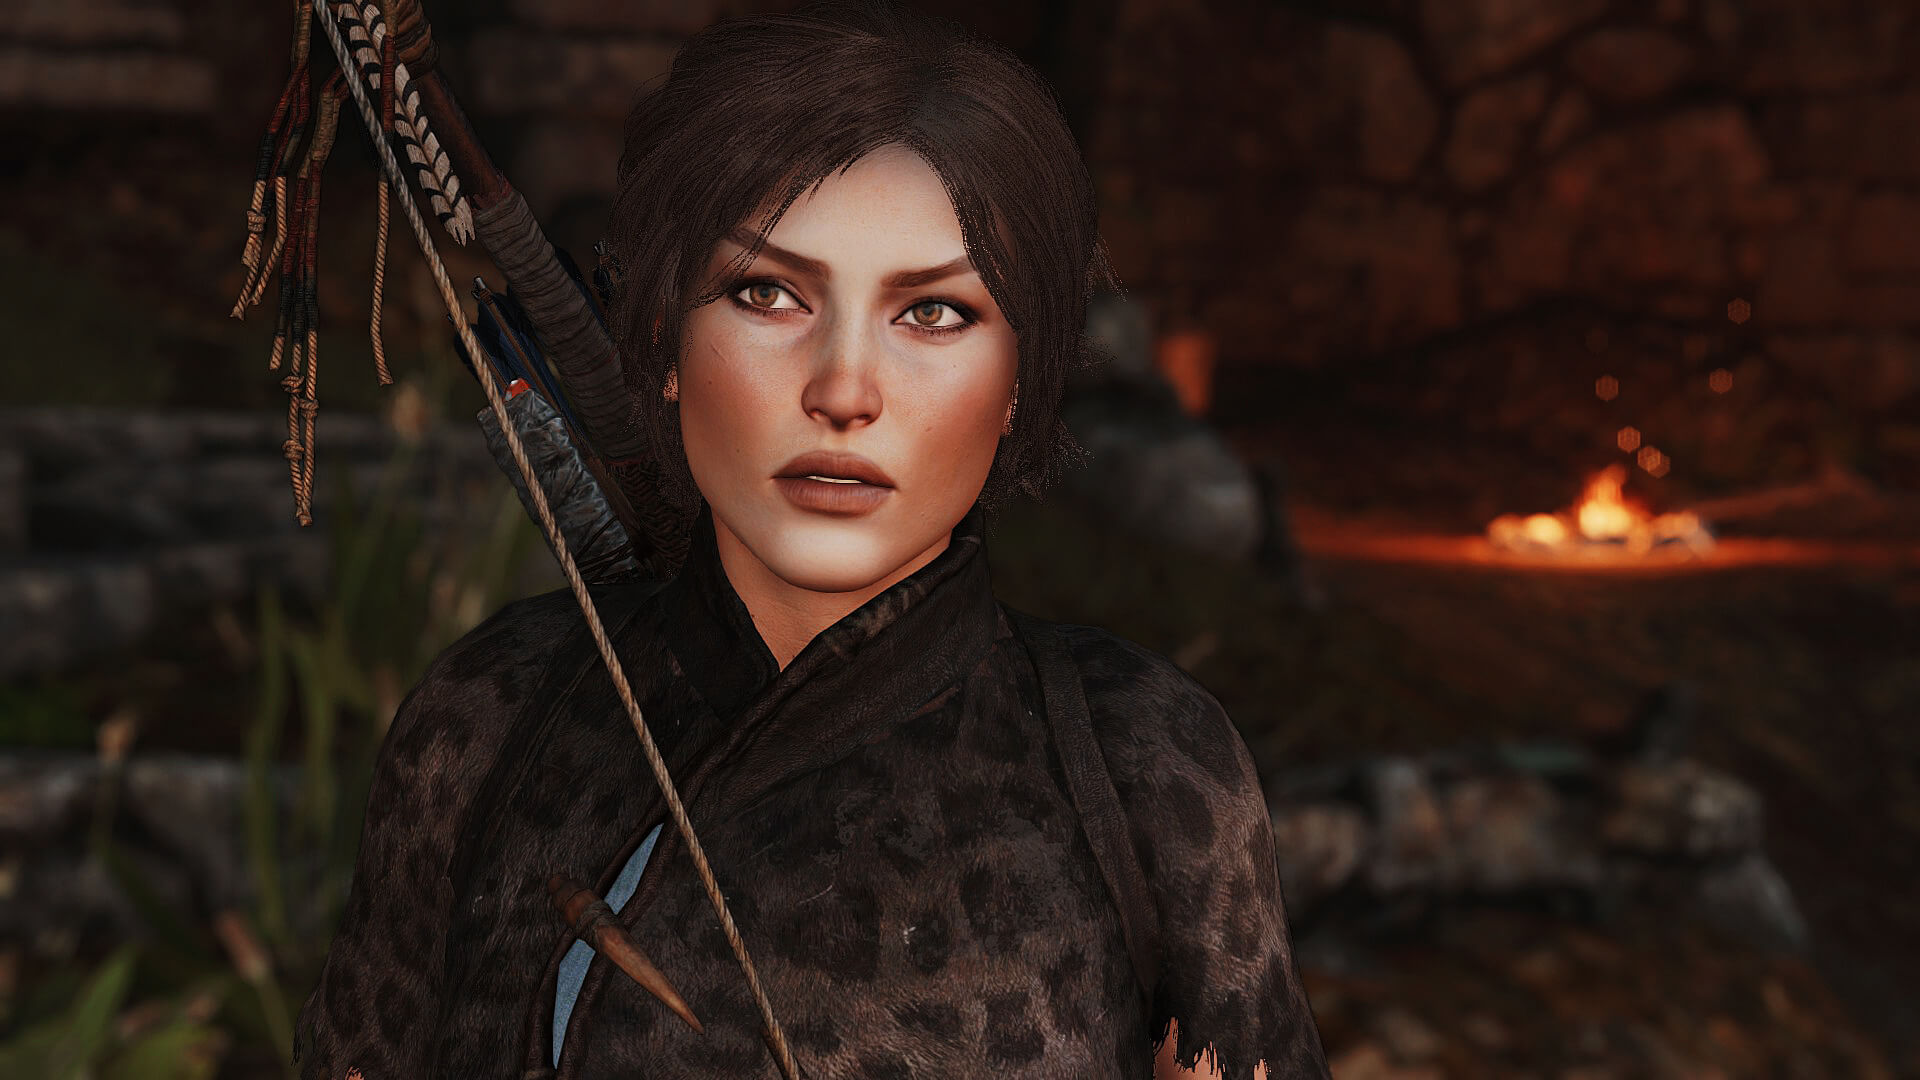 New Shadow Of The Tomb Raider Mod Replaces Lara S Face With One Closer To The Original Version